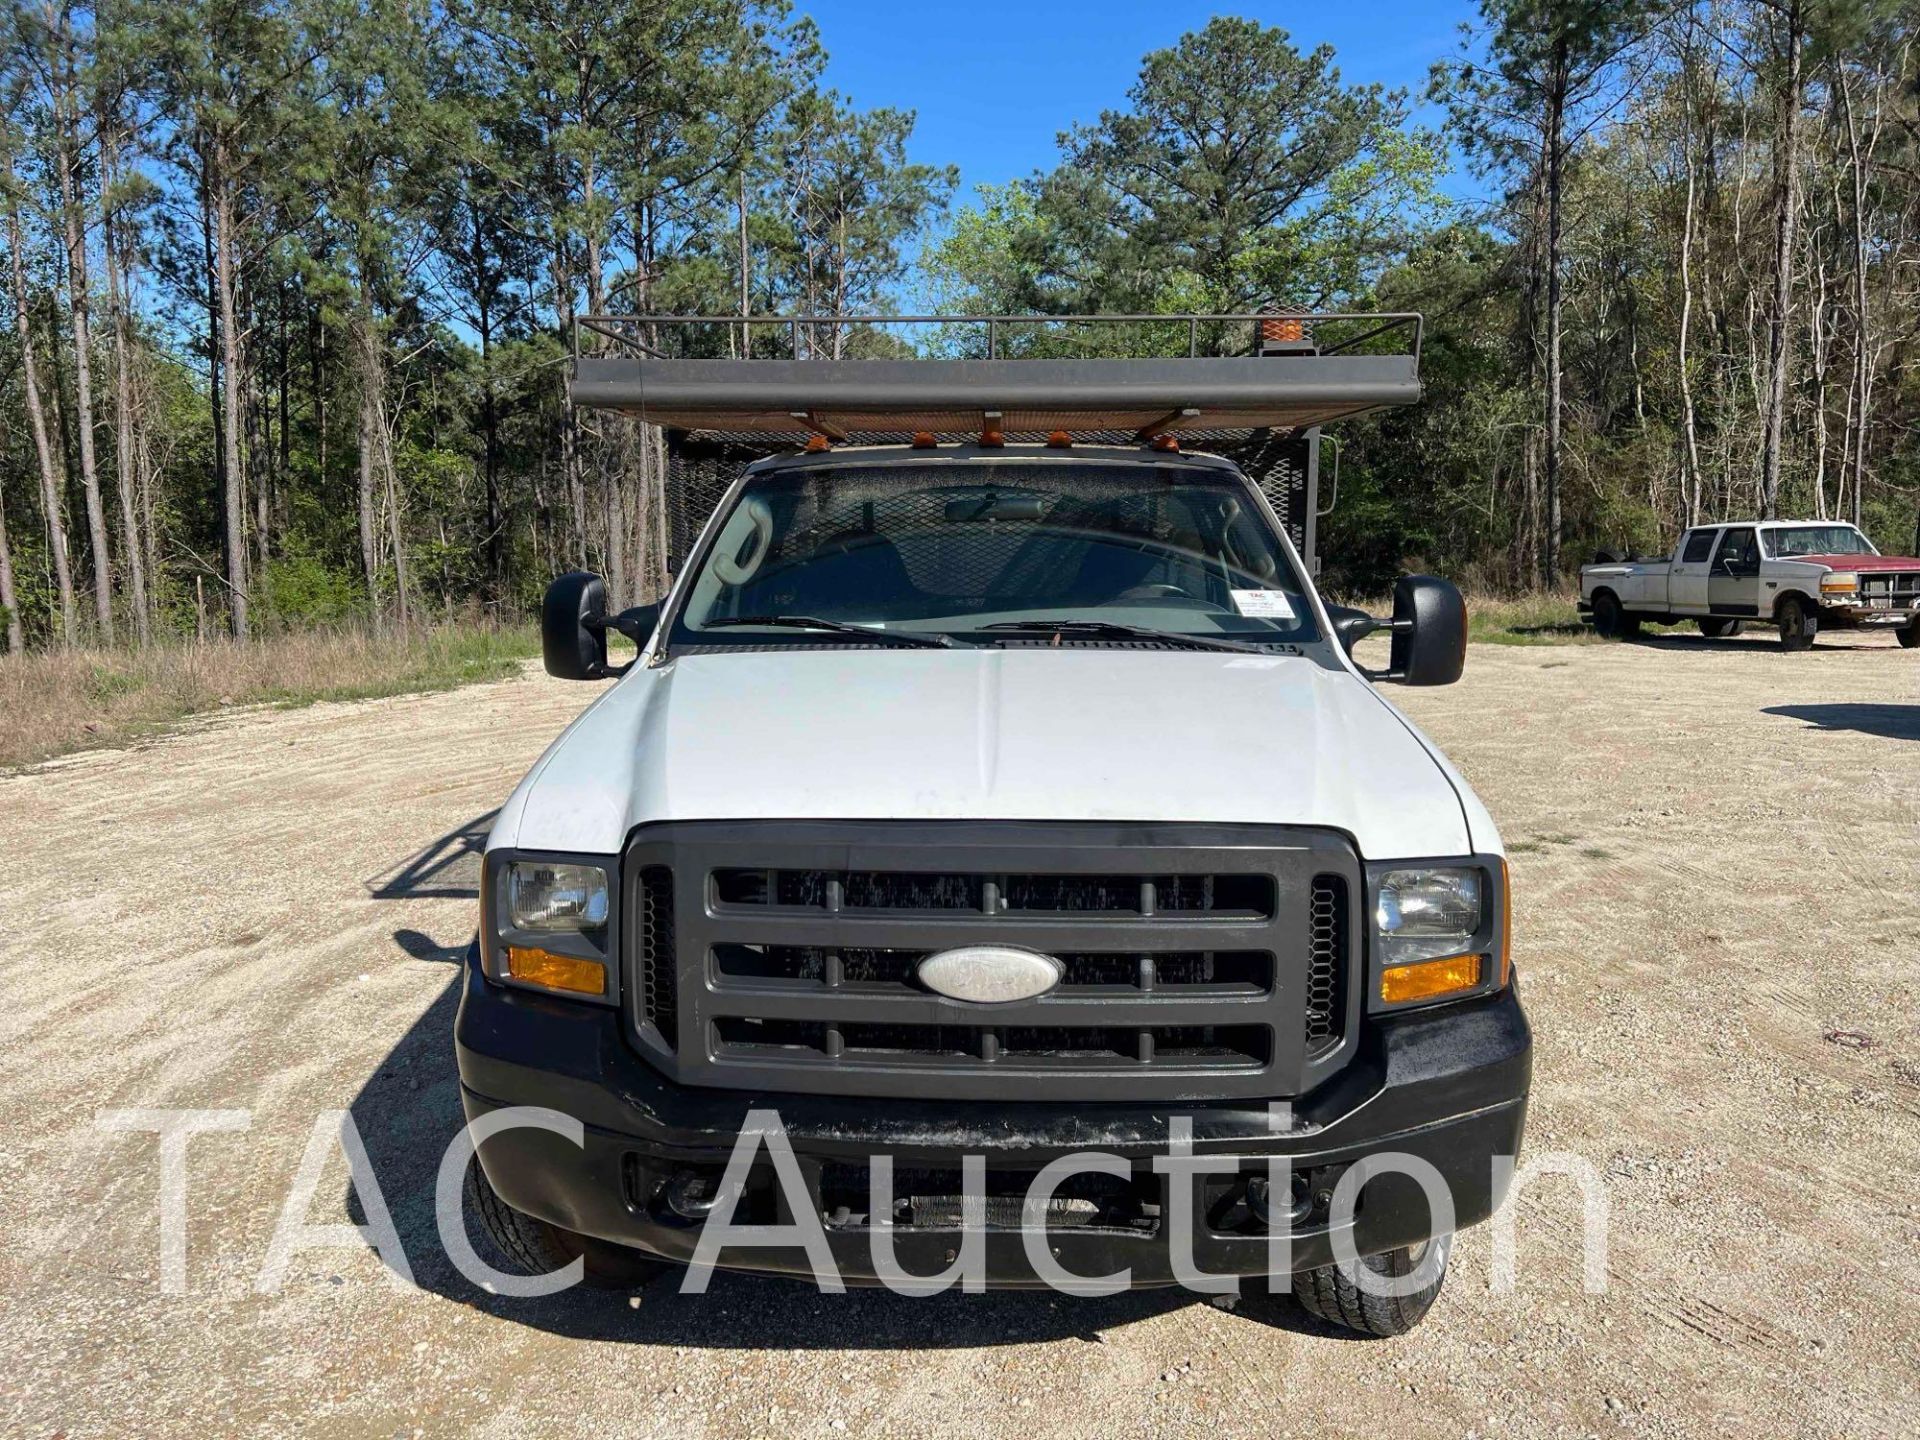 2005 Ford F350 4x4 W/ Landscape Body - Image 8 of 63